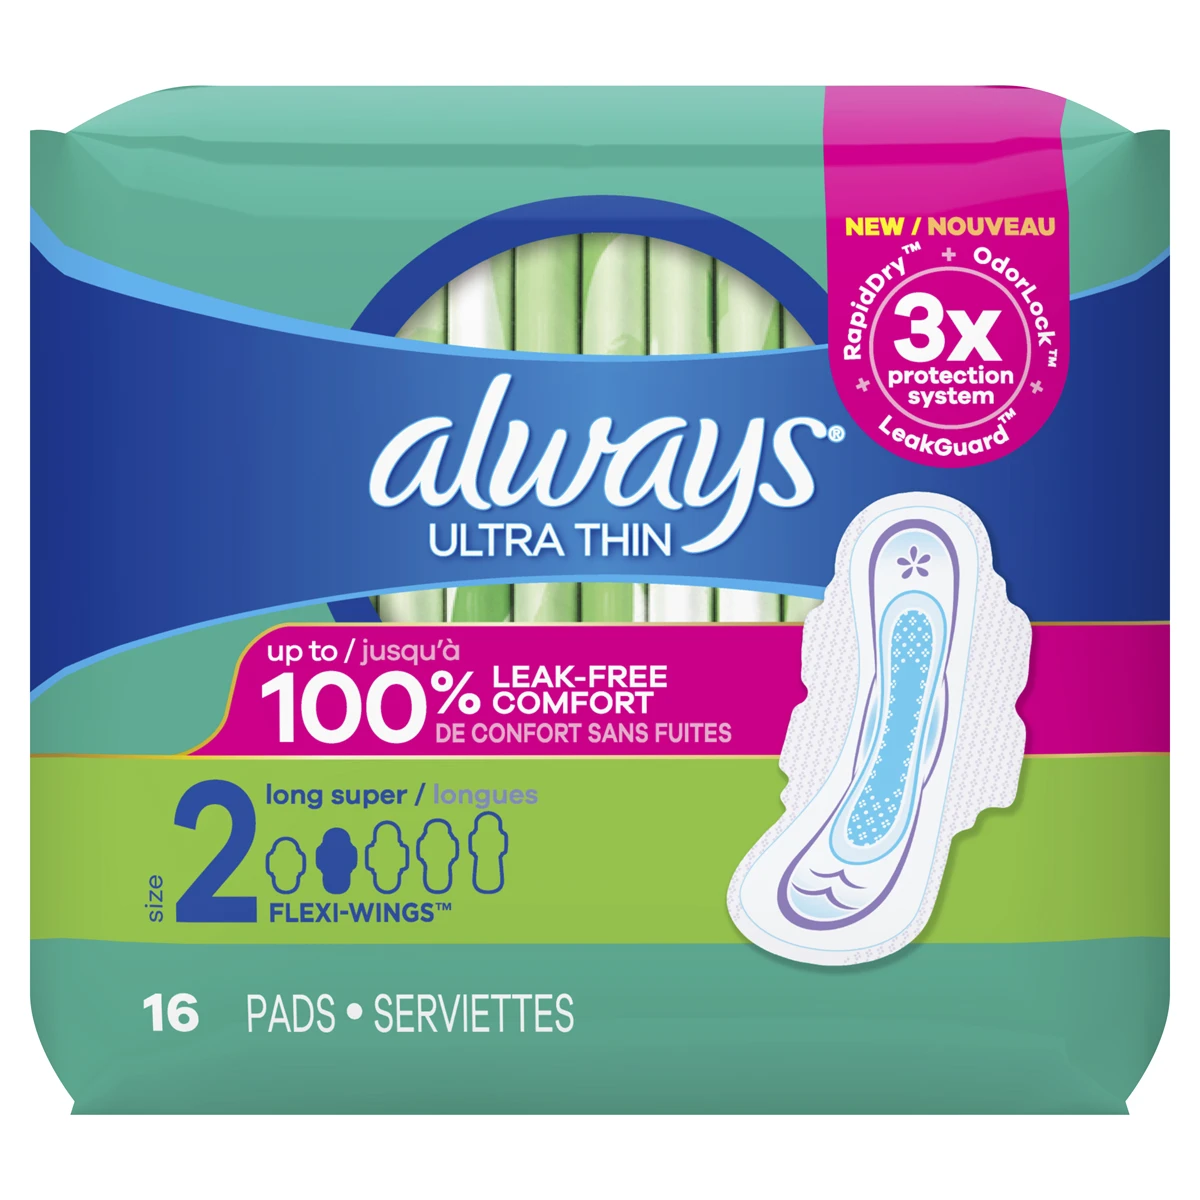 Always Ultra Thin Pads Size 2 Long Super Absorbency 16 Pads x 6 Packs = 96  Total